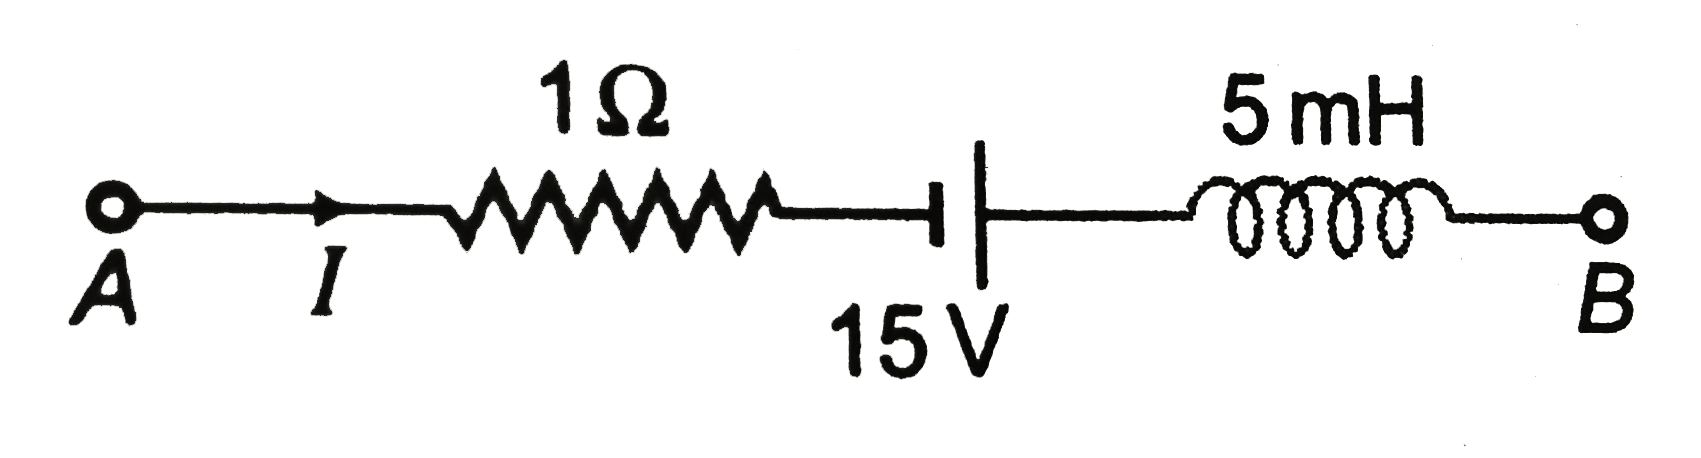 The network shown in the figure is a part of complete circuit. What is the potential difference VB-VA when the current I is 5 A and is decreasing at a rate of 10^3A//s?